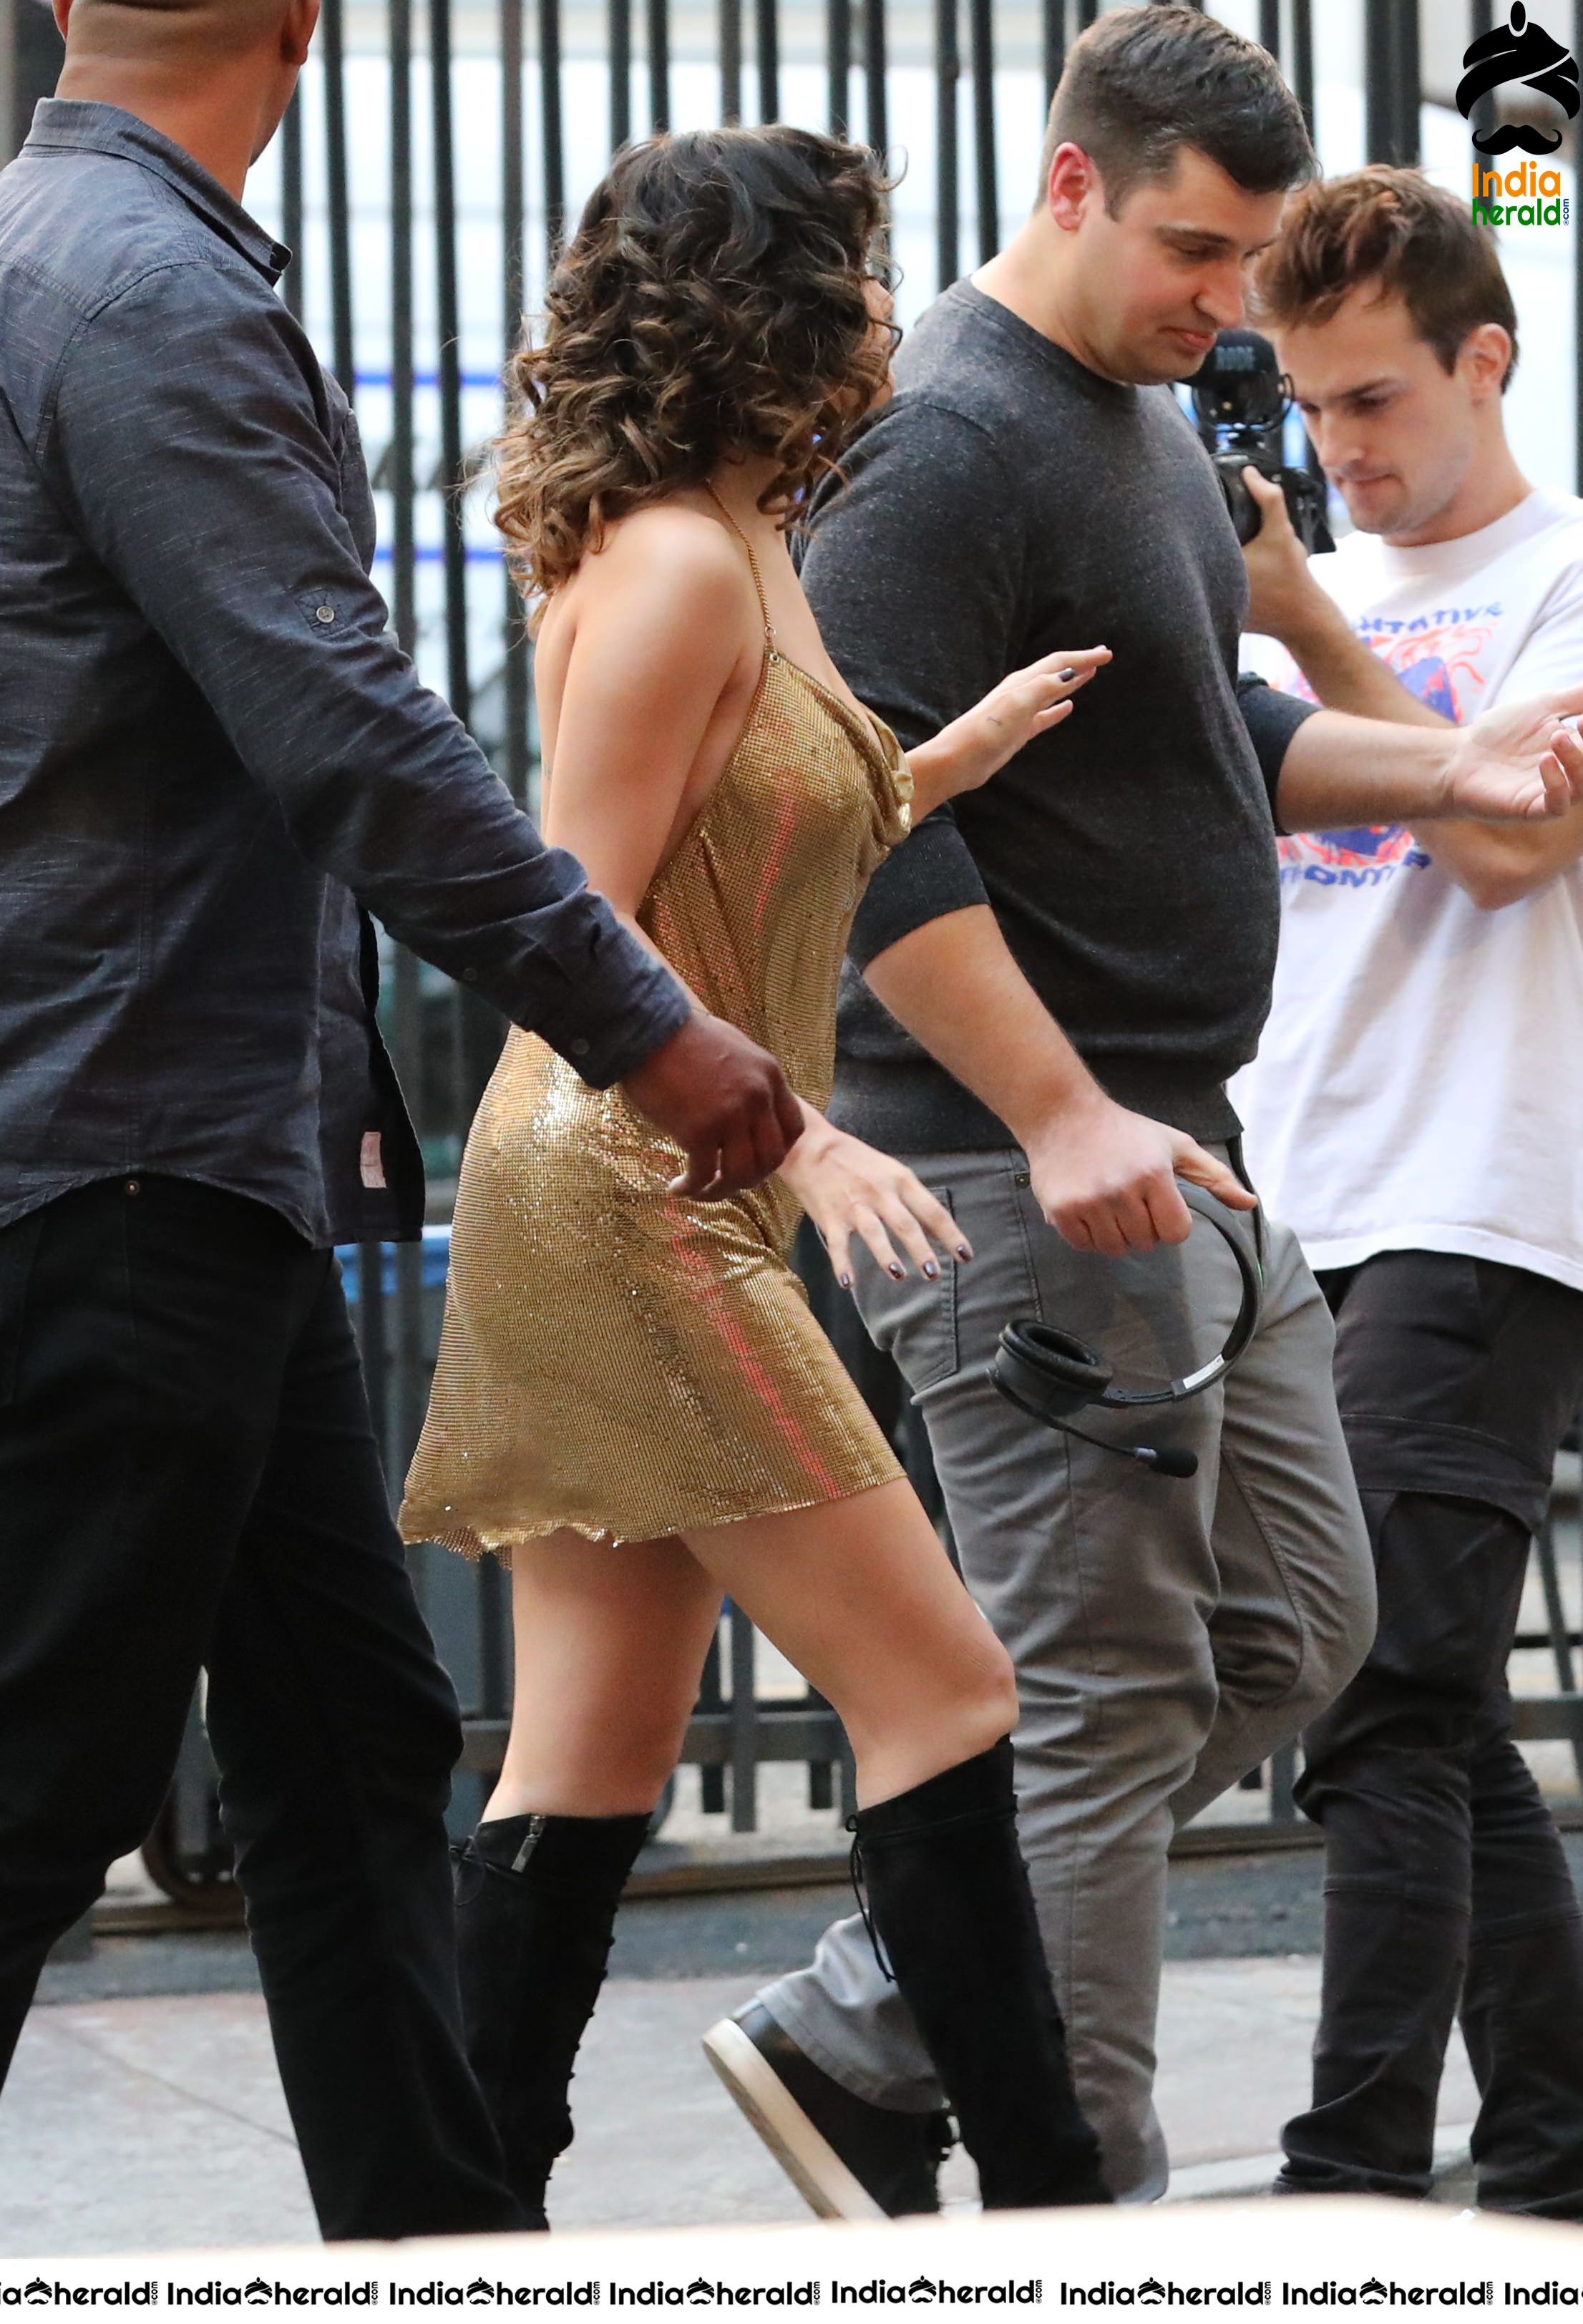 Selena Gomez flaunts her Bare Back during the shooting of a Music Video in LA